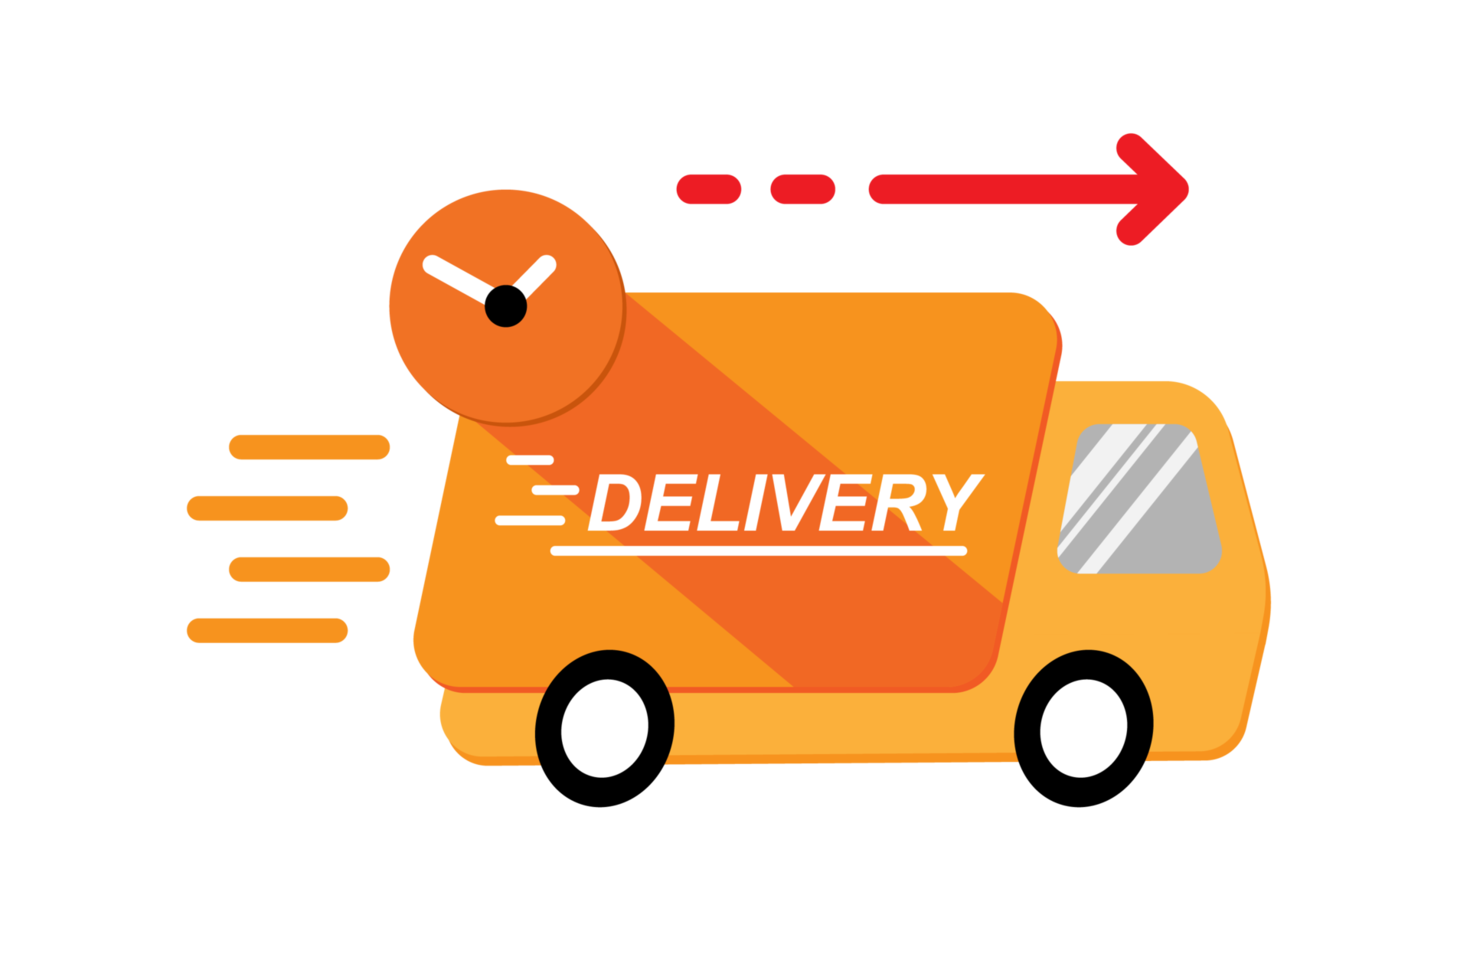 fast delivery truck icon. lorry with quick delivery service. fast product delivery. design illustration. png